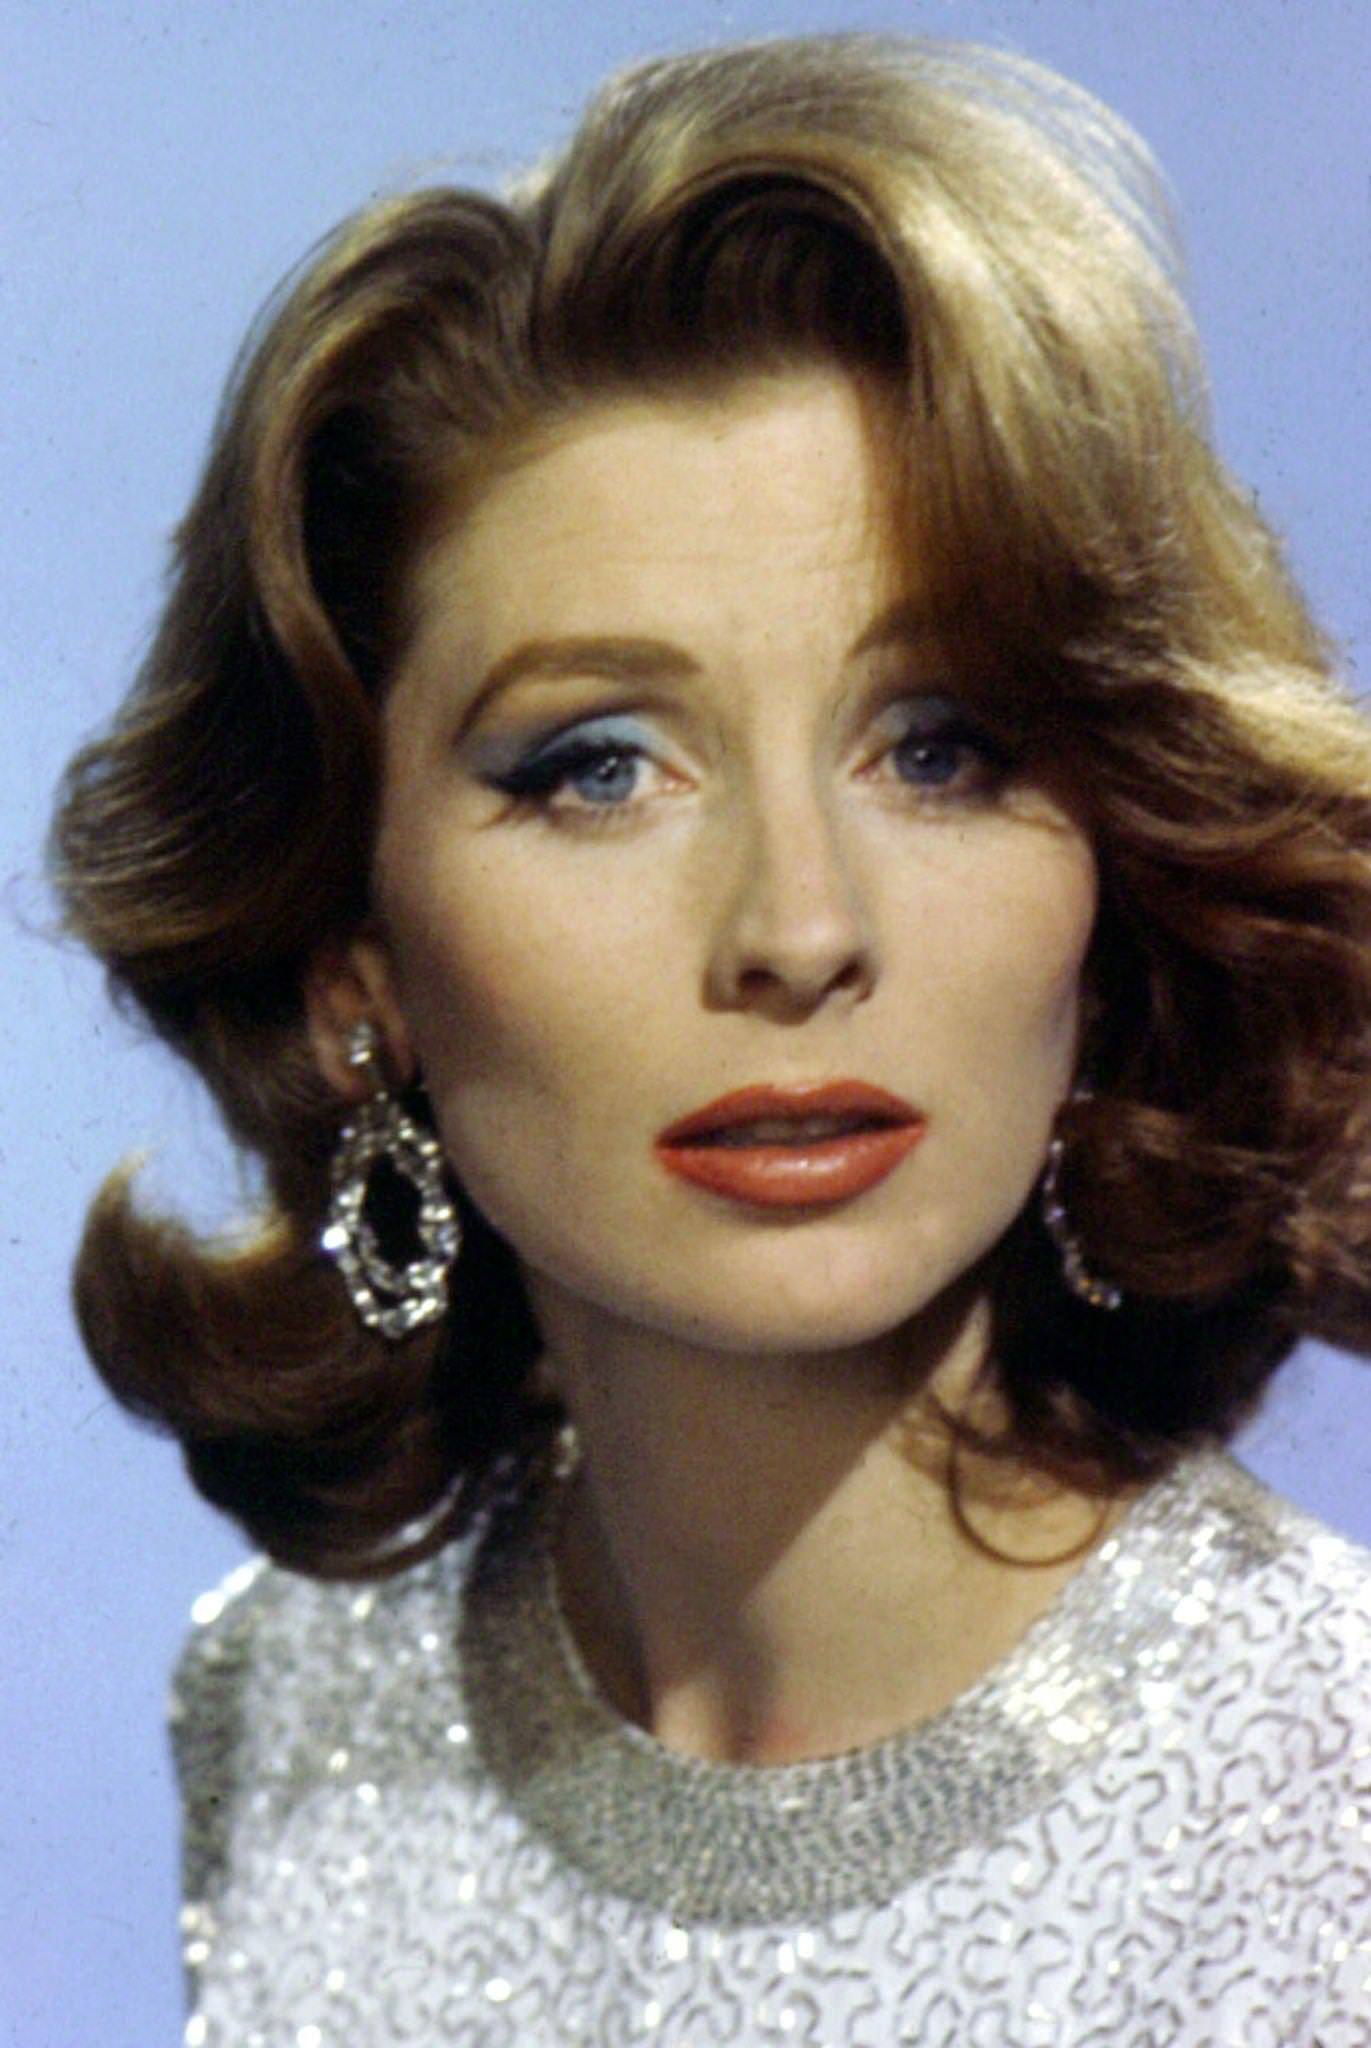 Suzy Parker Poses for Headshot to Promote 'The Interns,' Los Angeles, 1961